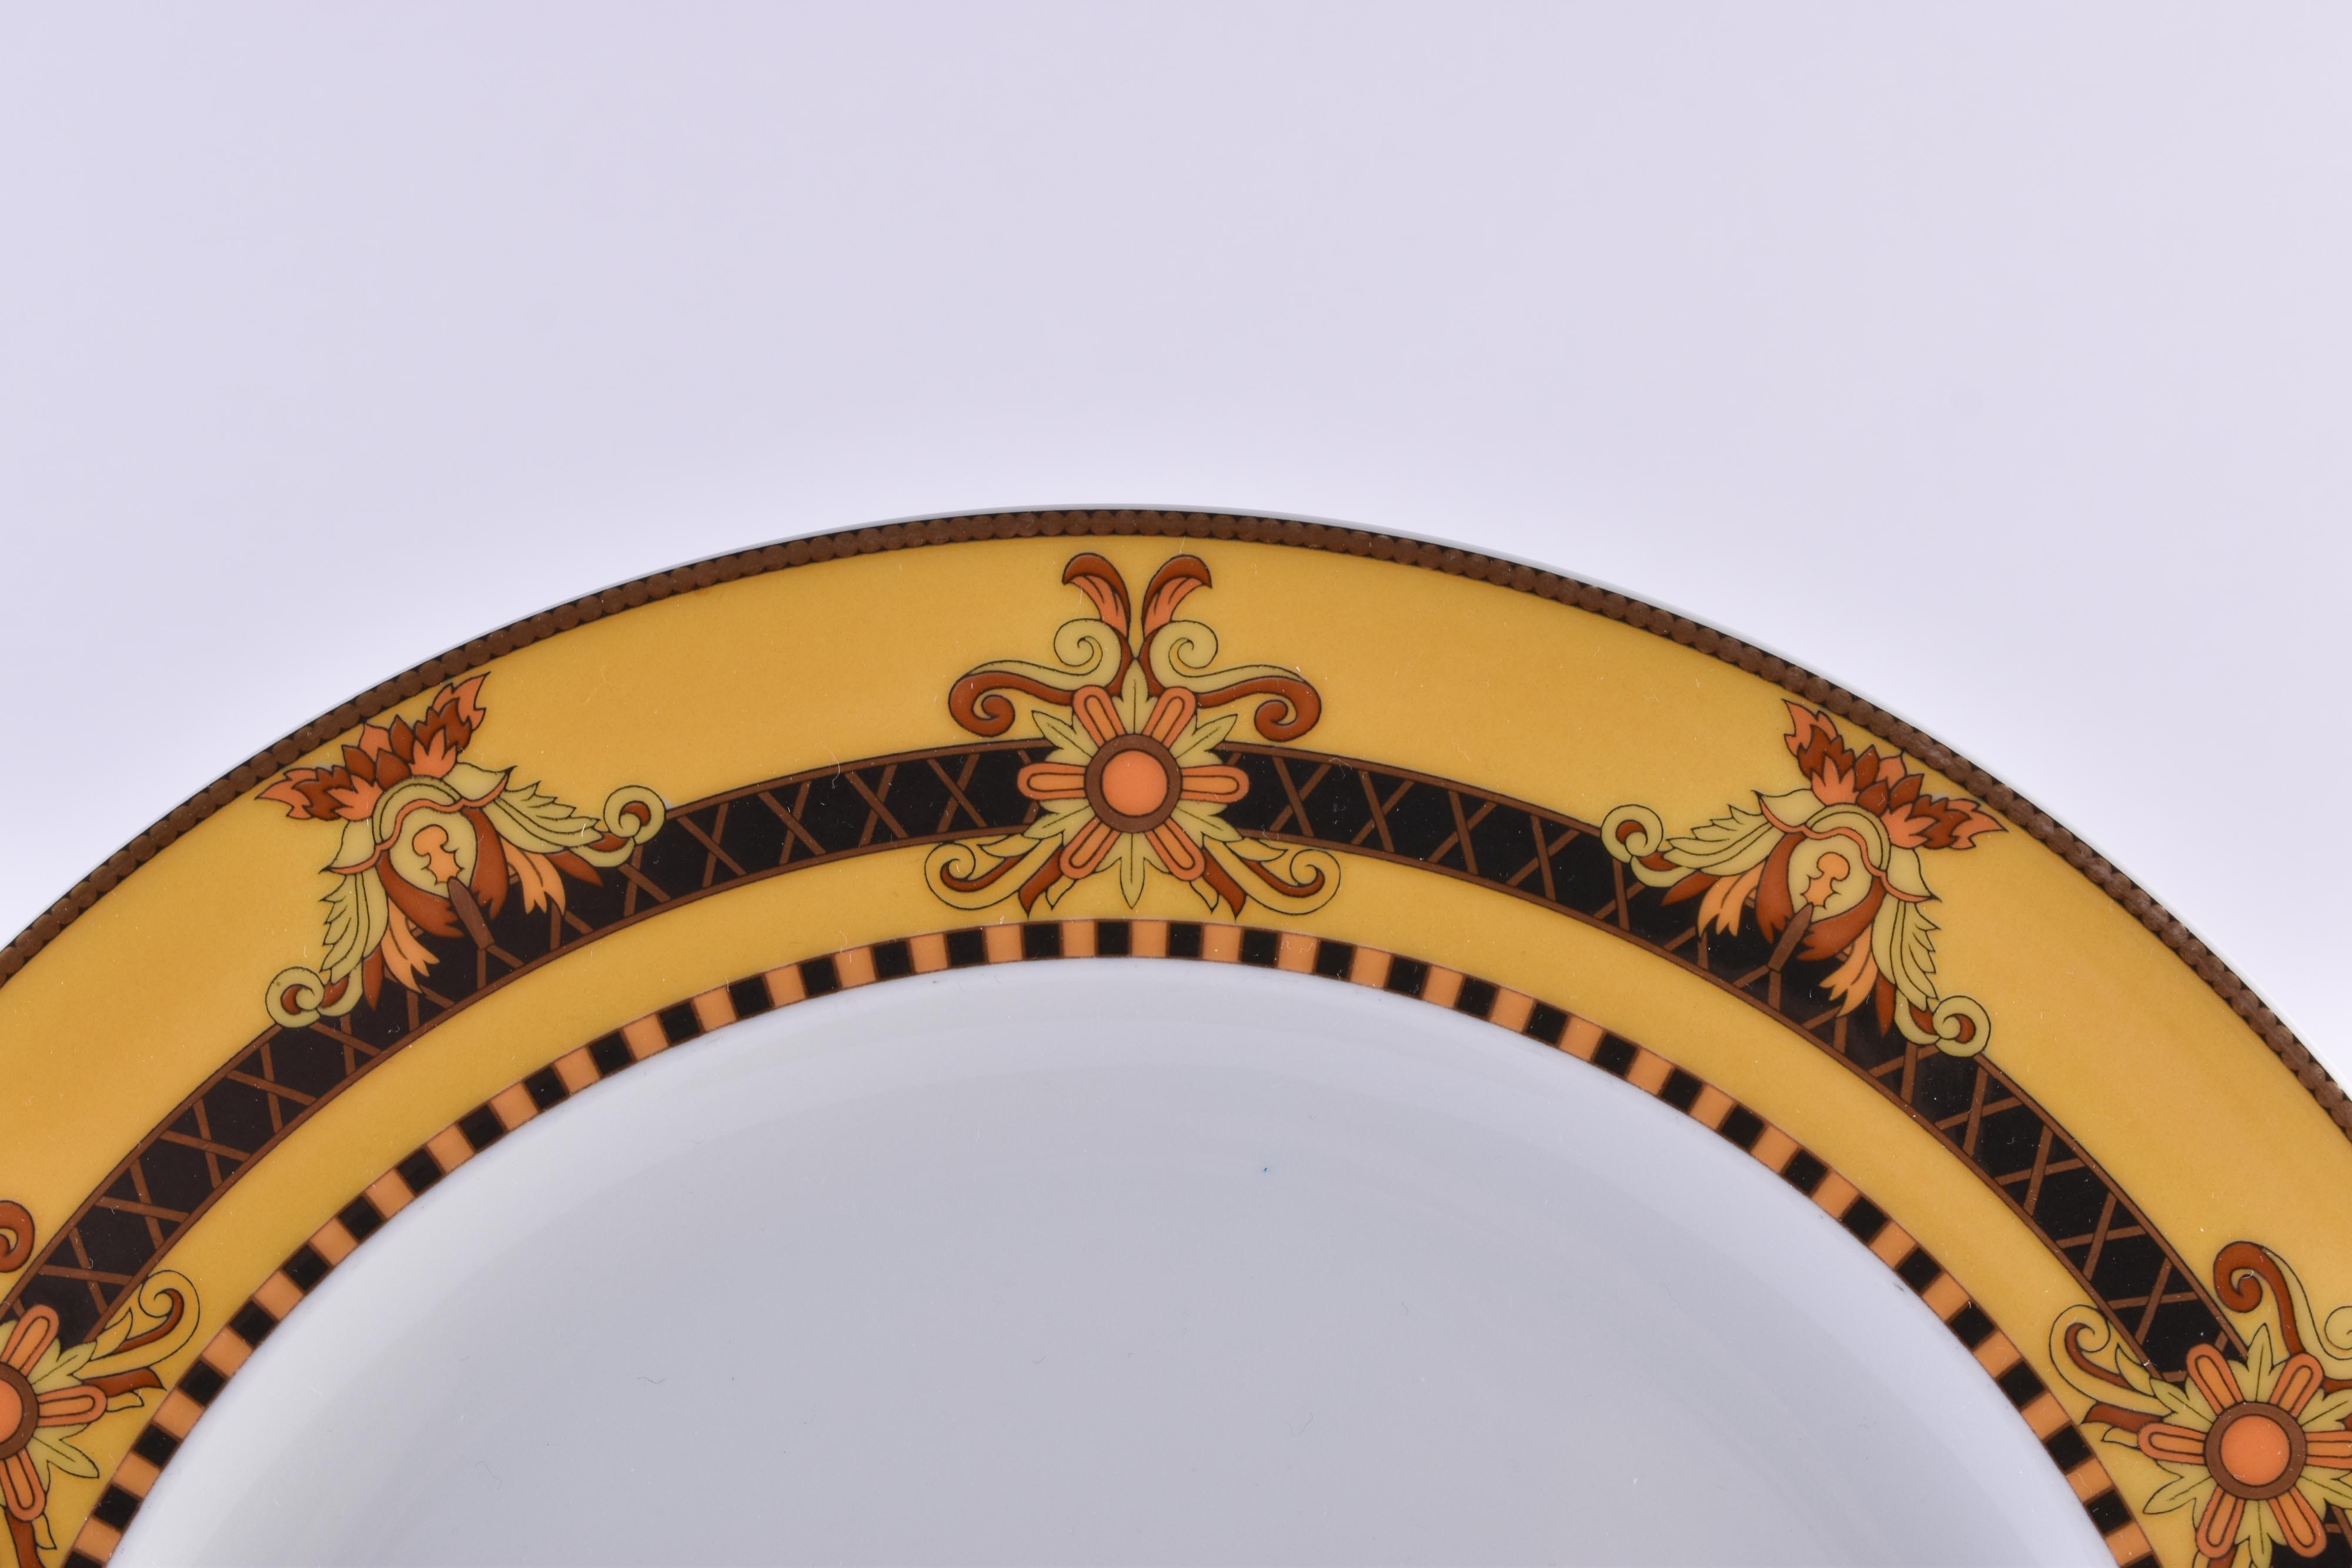 6 dinner plates Rosenthal Versace Barocco  - Image 2 of 3